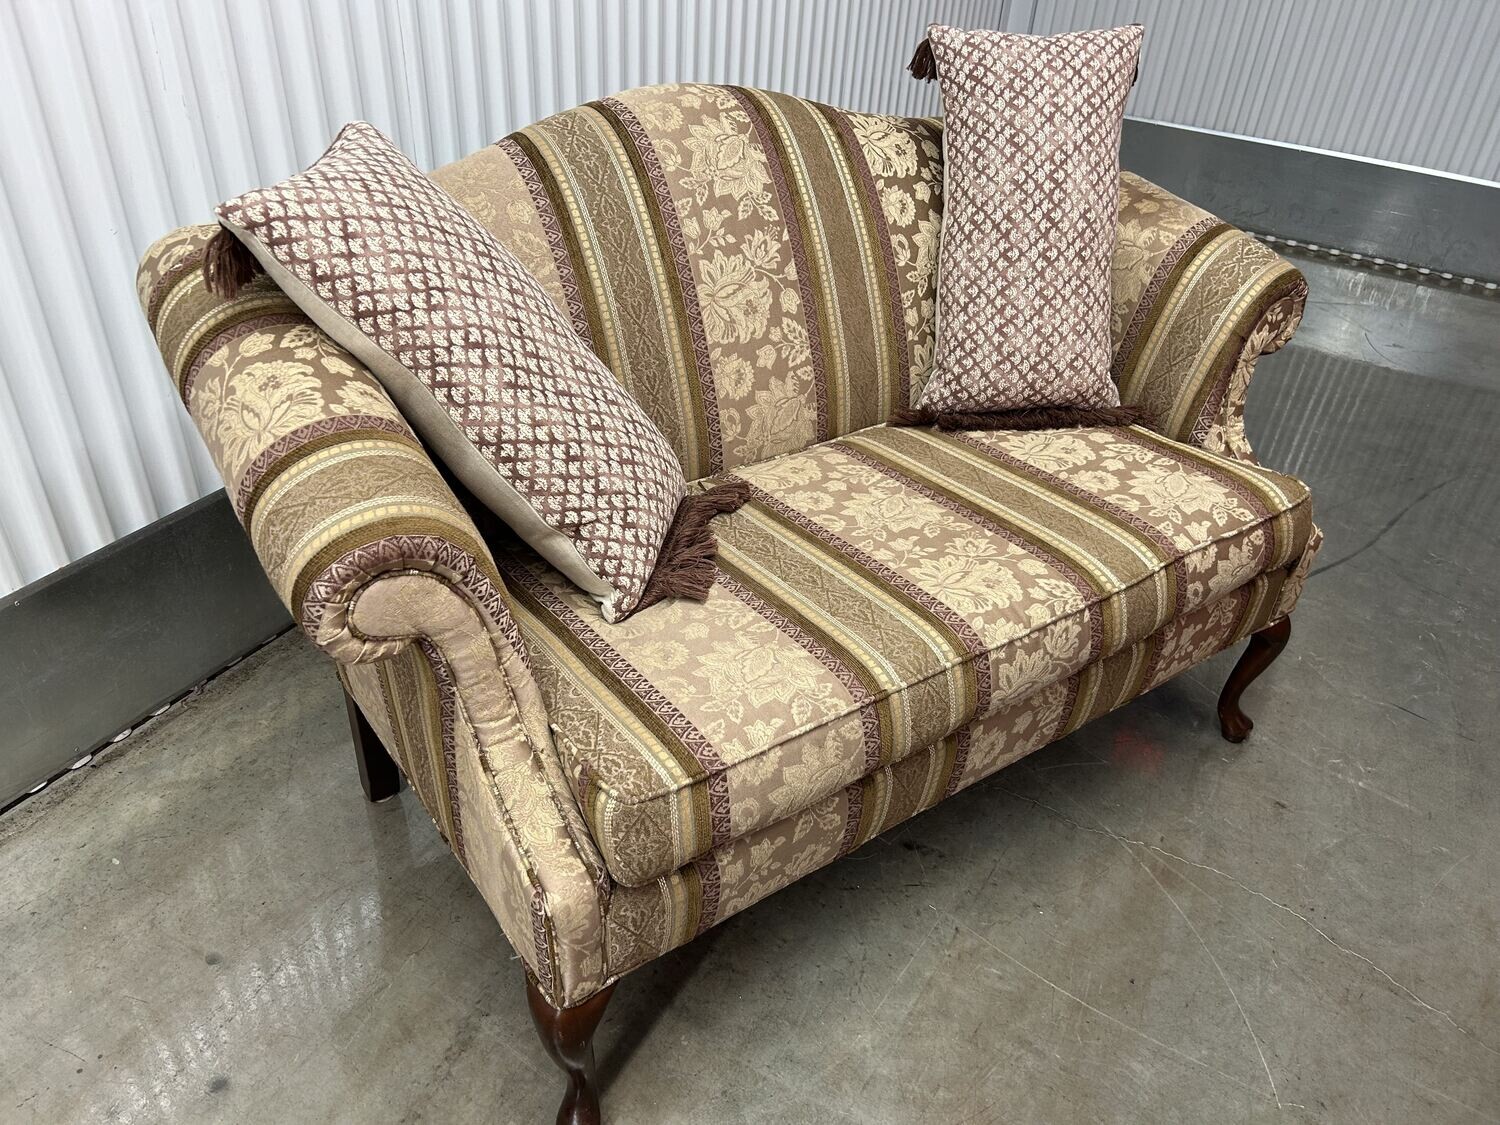 Queen Anne style Settee #2322 ** 1 wk. to sell, full price